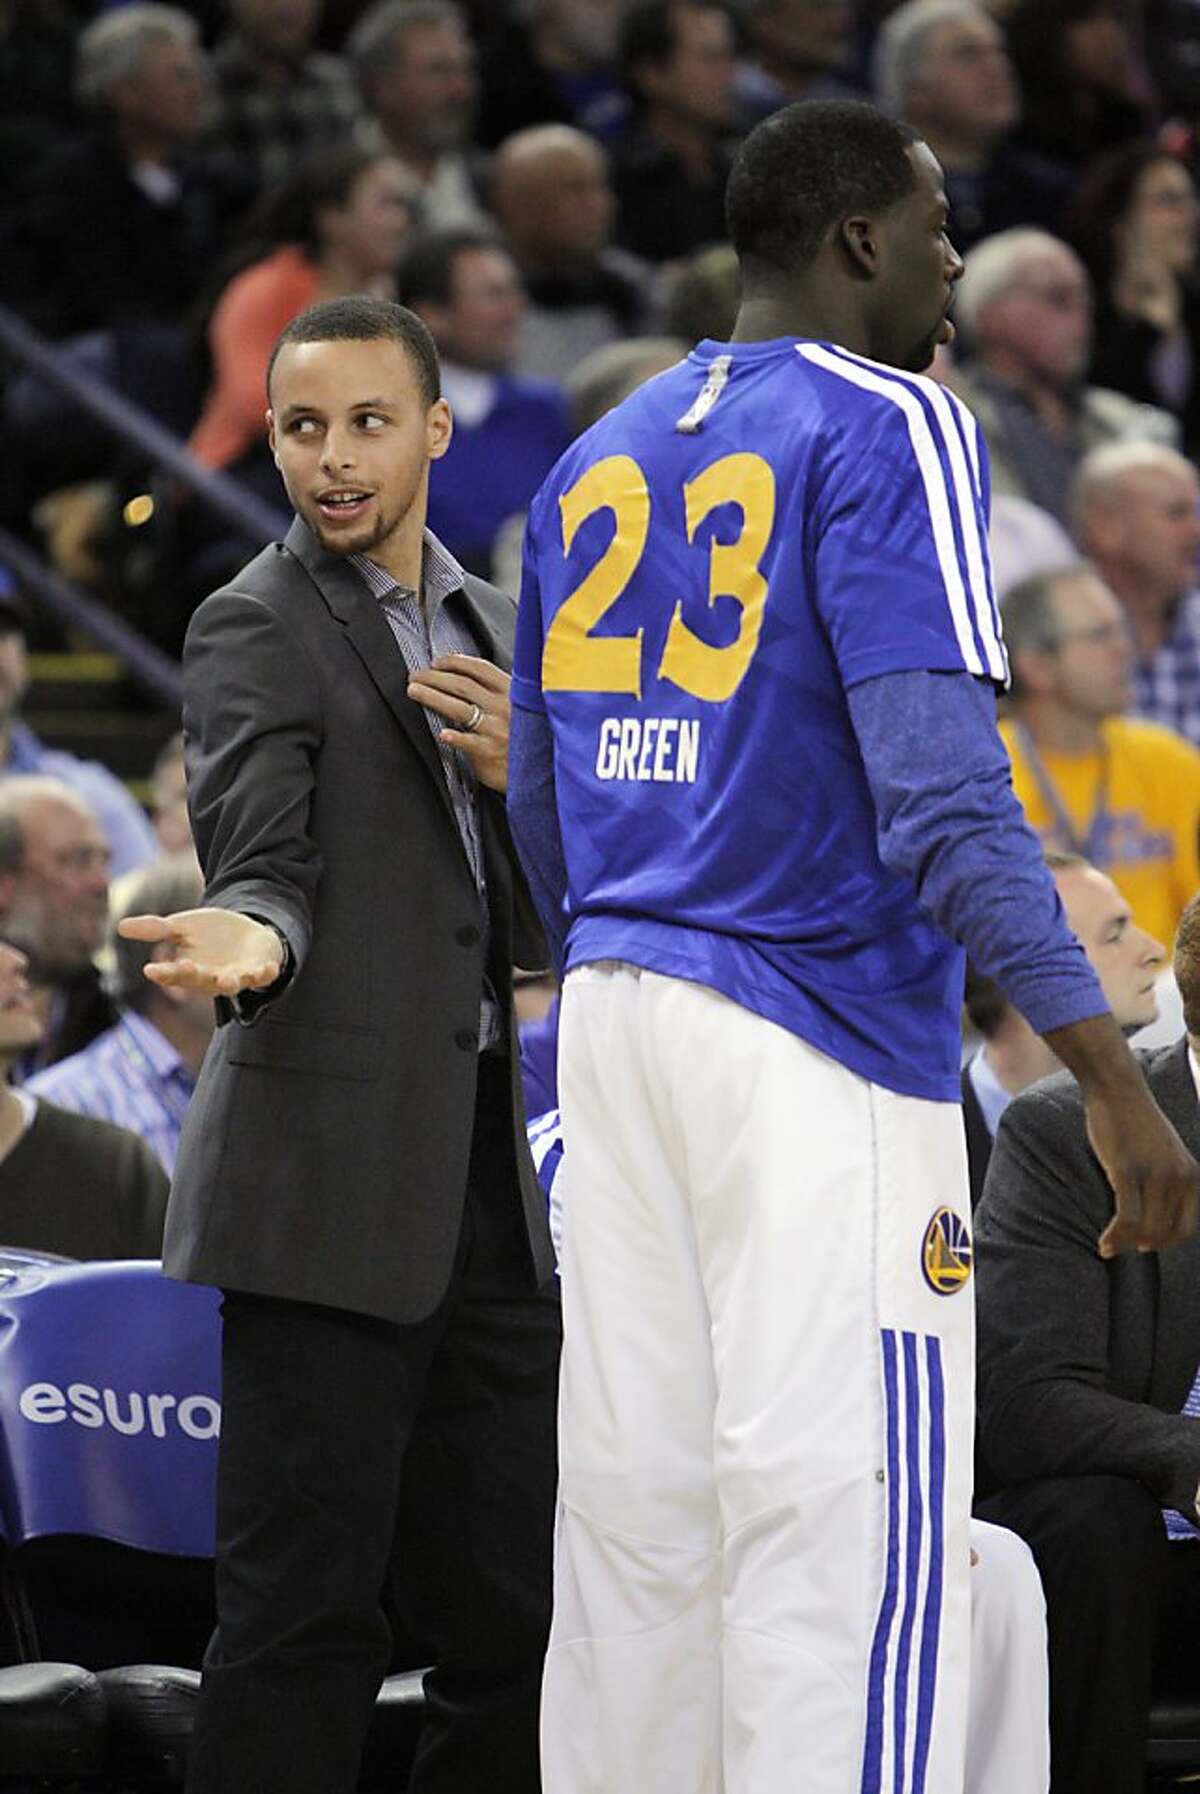 Stephen Curry gestures on the bench after Klay Thompson hit a three-point shot in the first half. The Golden State Warriors played the Memphis Grizzlies at Oracle Arena in Oakland, Calif., on Wednesday, November 20, 2013